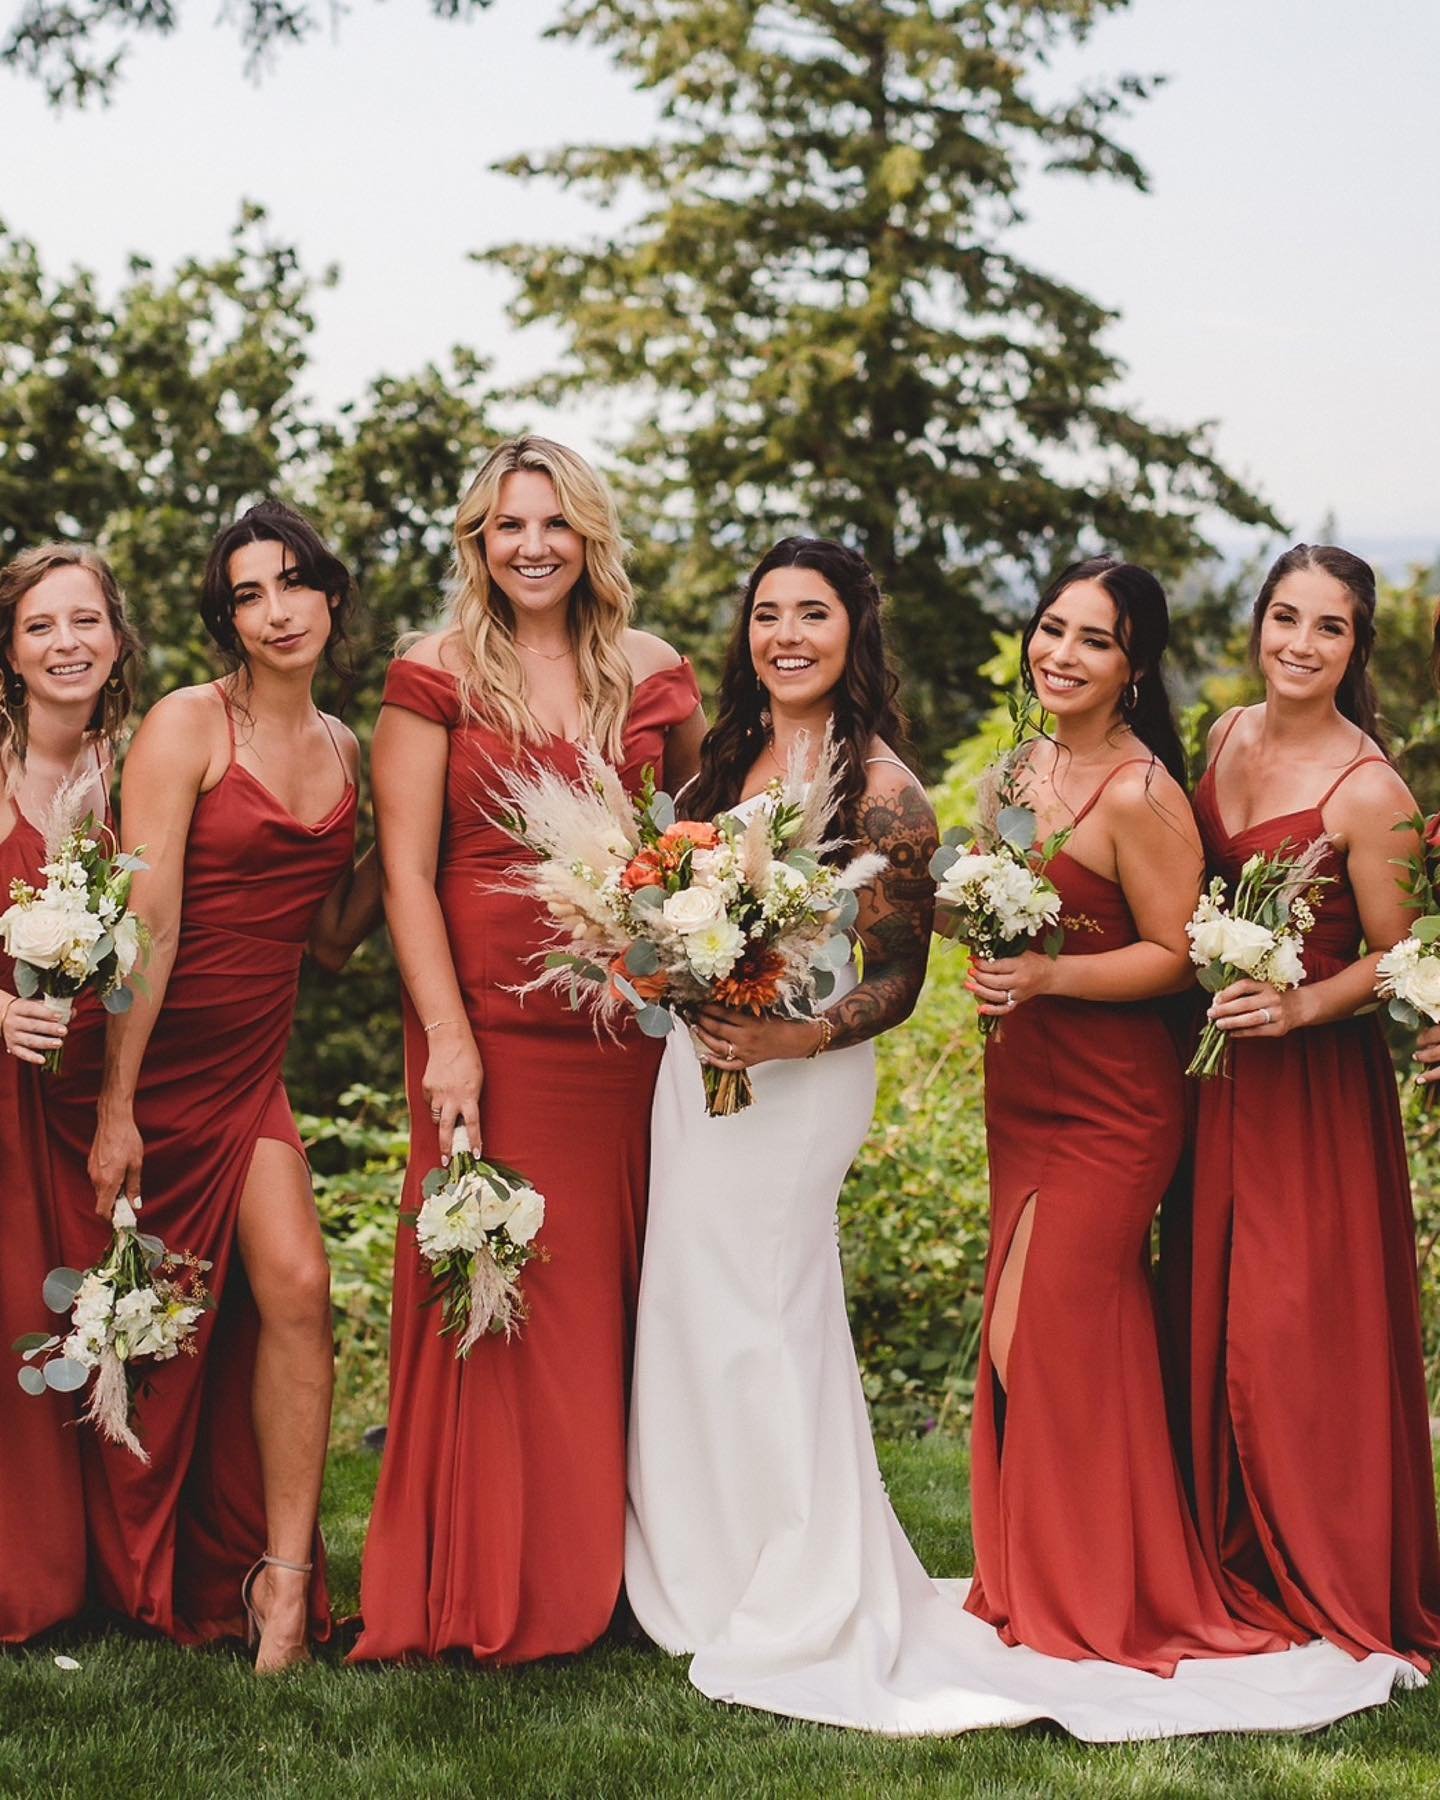 Hey Bend Brides-to-be! 🌲✨

Swipe left to soak up the dreamiest bridal party vibes from Sarah &amp; Kyle&rsquo;s wedding! 📸 From laughter-filled prep to dance floor shenanigans, these photos capture the essence of having your girl squad by your side